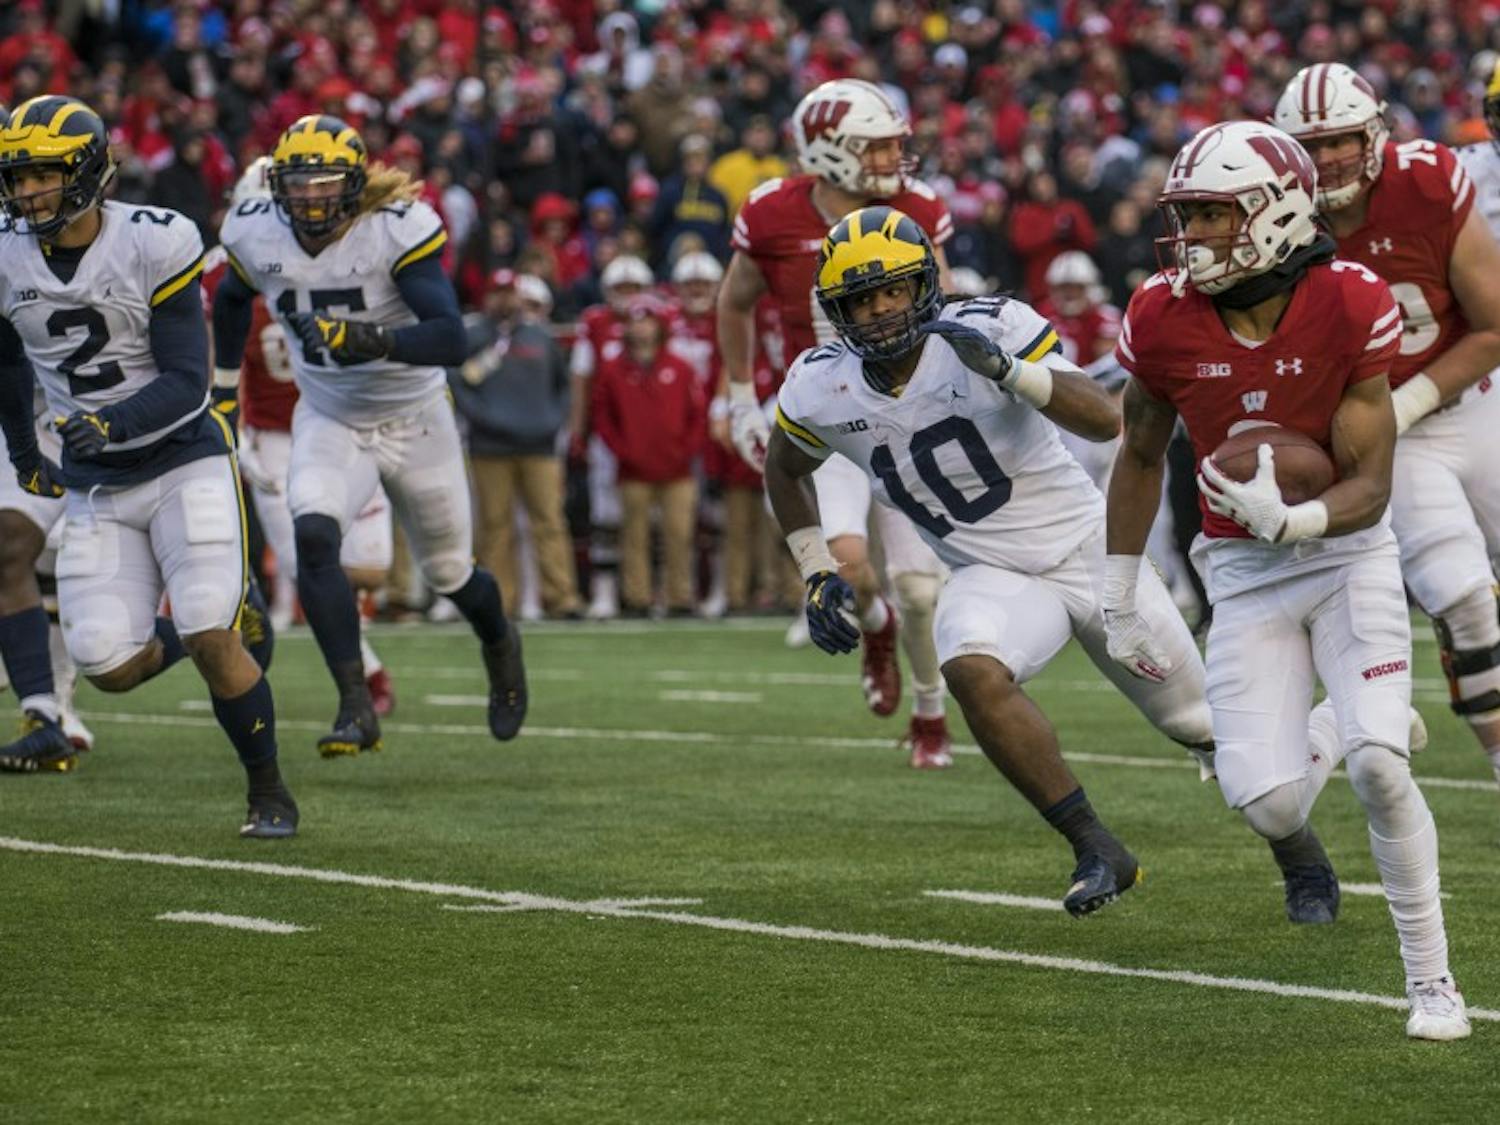 Kendric Pryor had his second rushing touchdown in as many weeks as he, along with other young Wisconsin receivers, played a critical role in UW's victory.&nbsp;